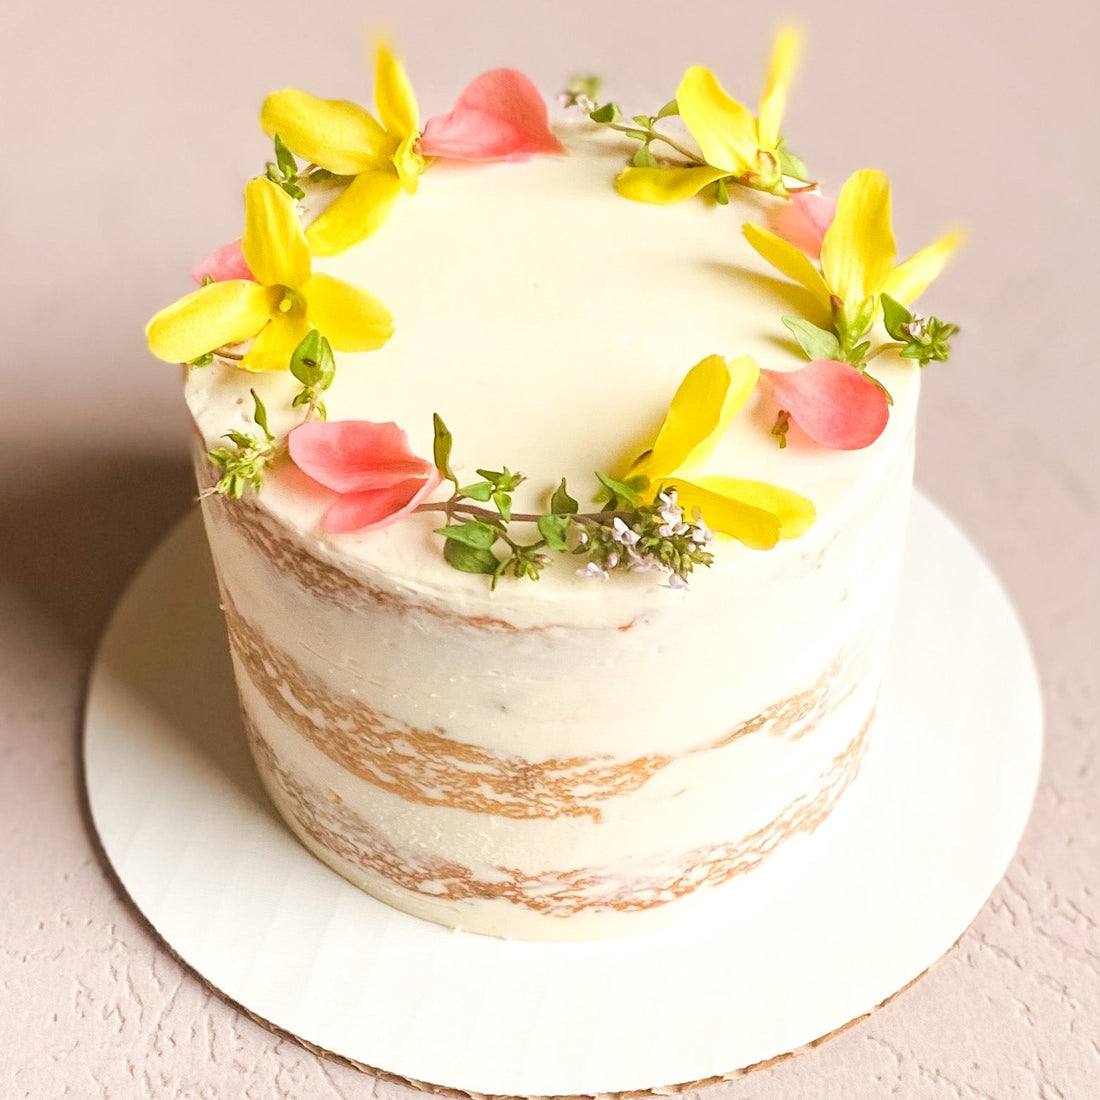 A round cake frosted in a sheer layer of white buttercream and decorated with a fresh floral crown.